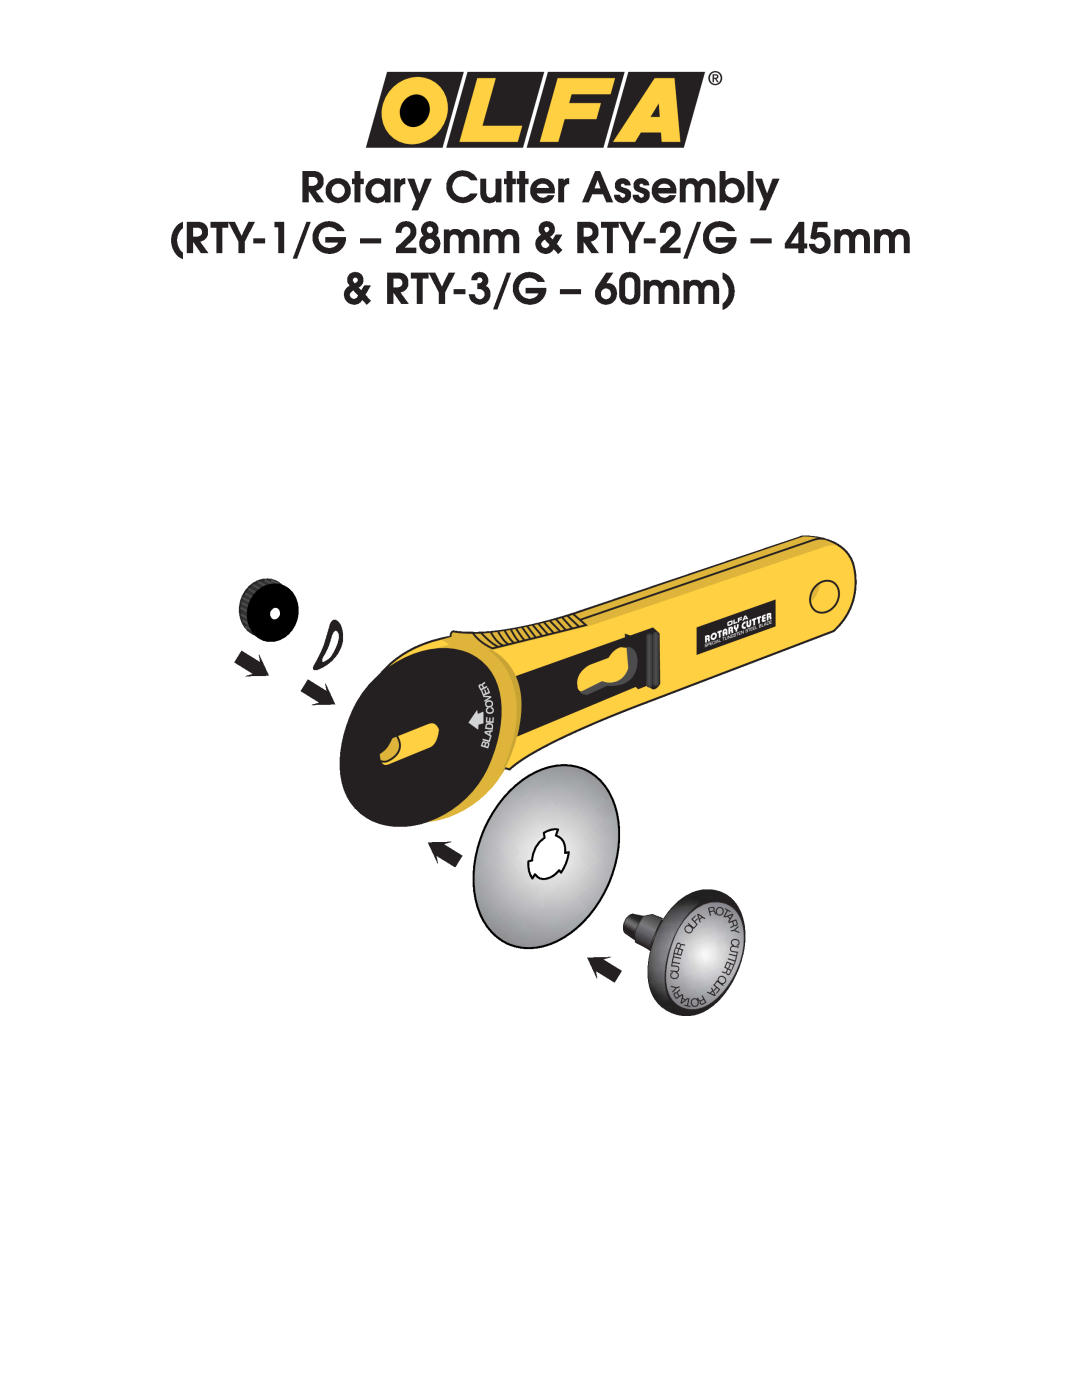 Olfa manual Rotary Cutter Assembly, RTY-1/G- 28mm & RTY-2/G- 45mm & RTY-3/G- 60mm, C E D A L B 